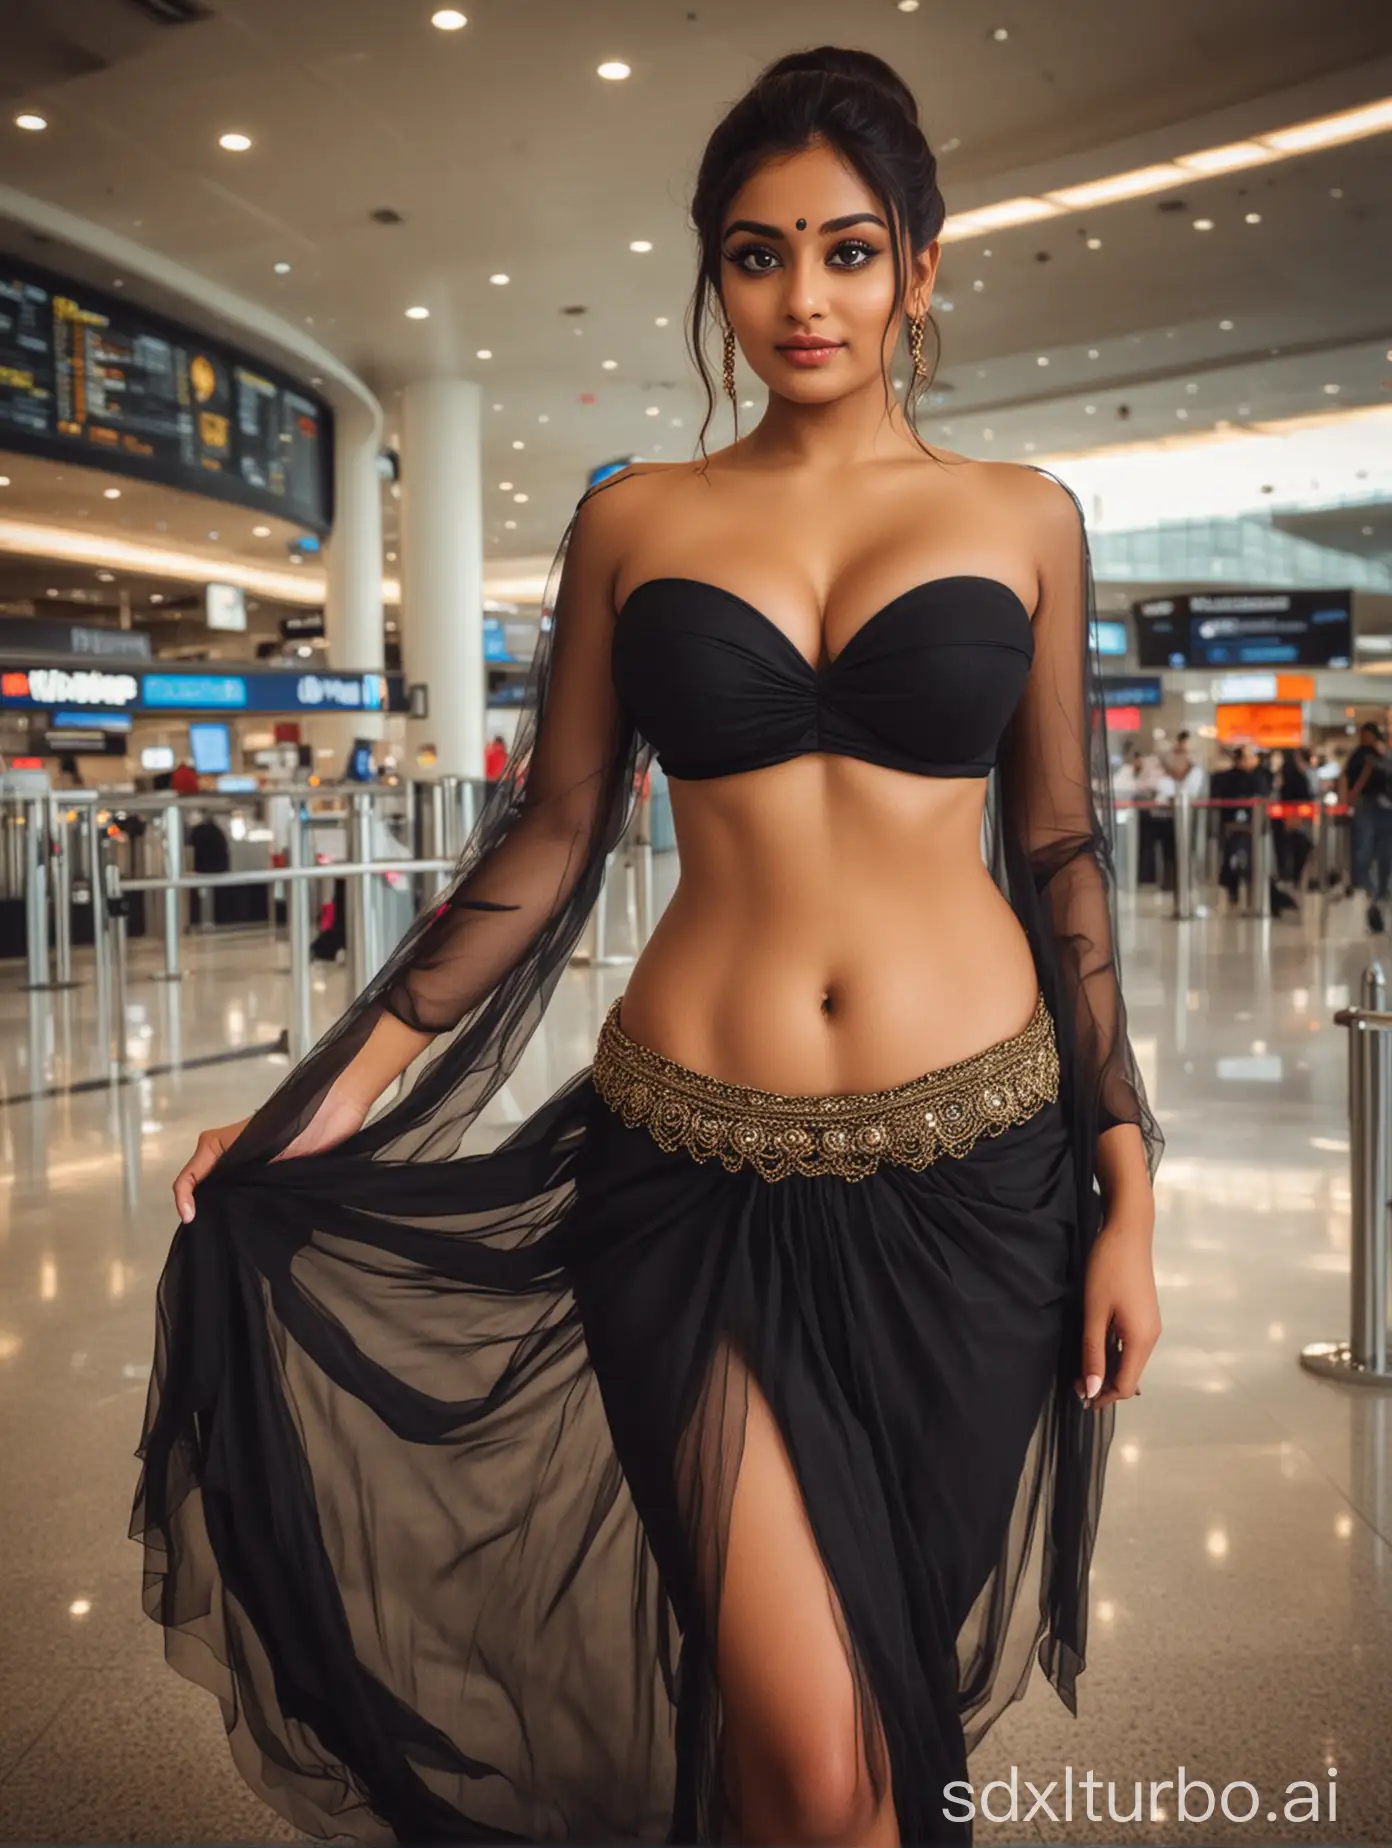 curvy Indian woman standing in the airport with enormous breasts. with hairdo hair bun, She is wearing strapless plain spandex tightest transparent plain black lengha suit with deep v cleavage. big eyes, perfect wine eyes, fantastic face, beautiful look, with Plump female body, she has a busty body, She is showing deepest v cleavage. Her hair is styled in loose waves. full body until knee view..